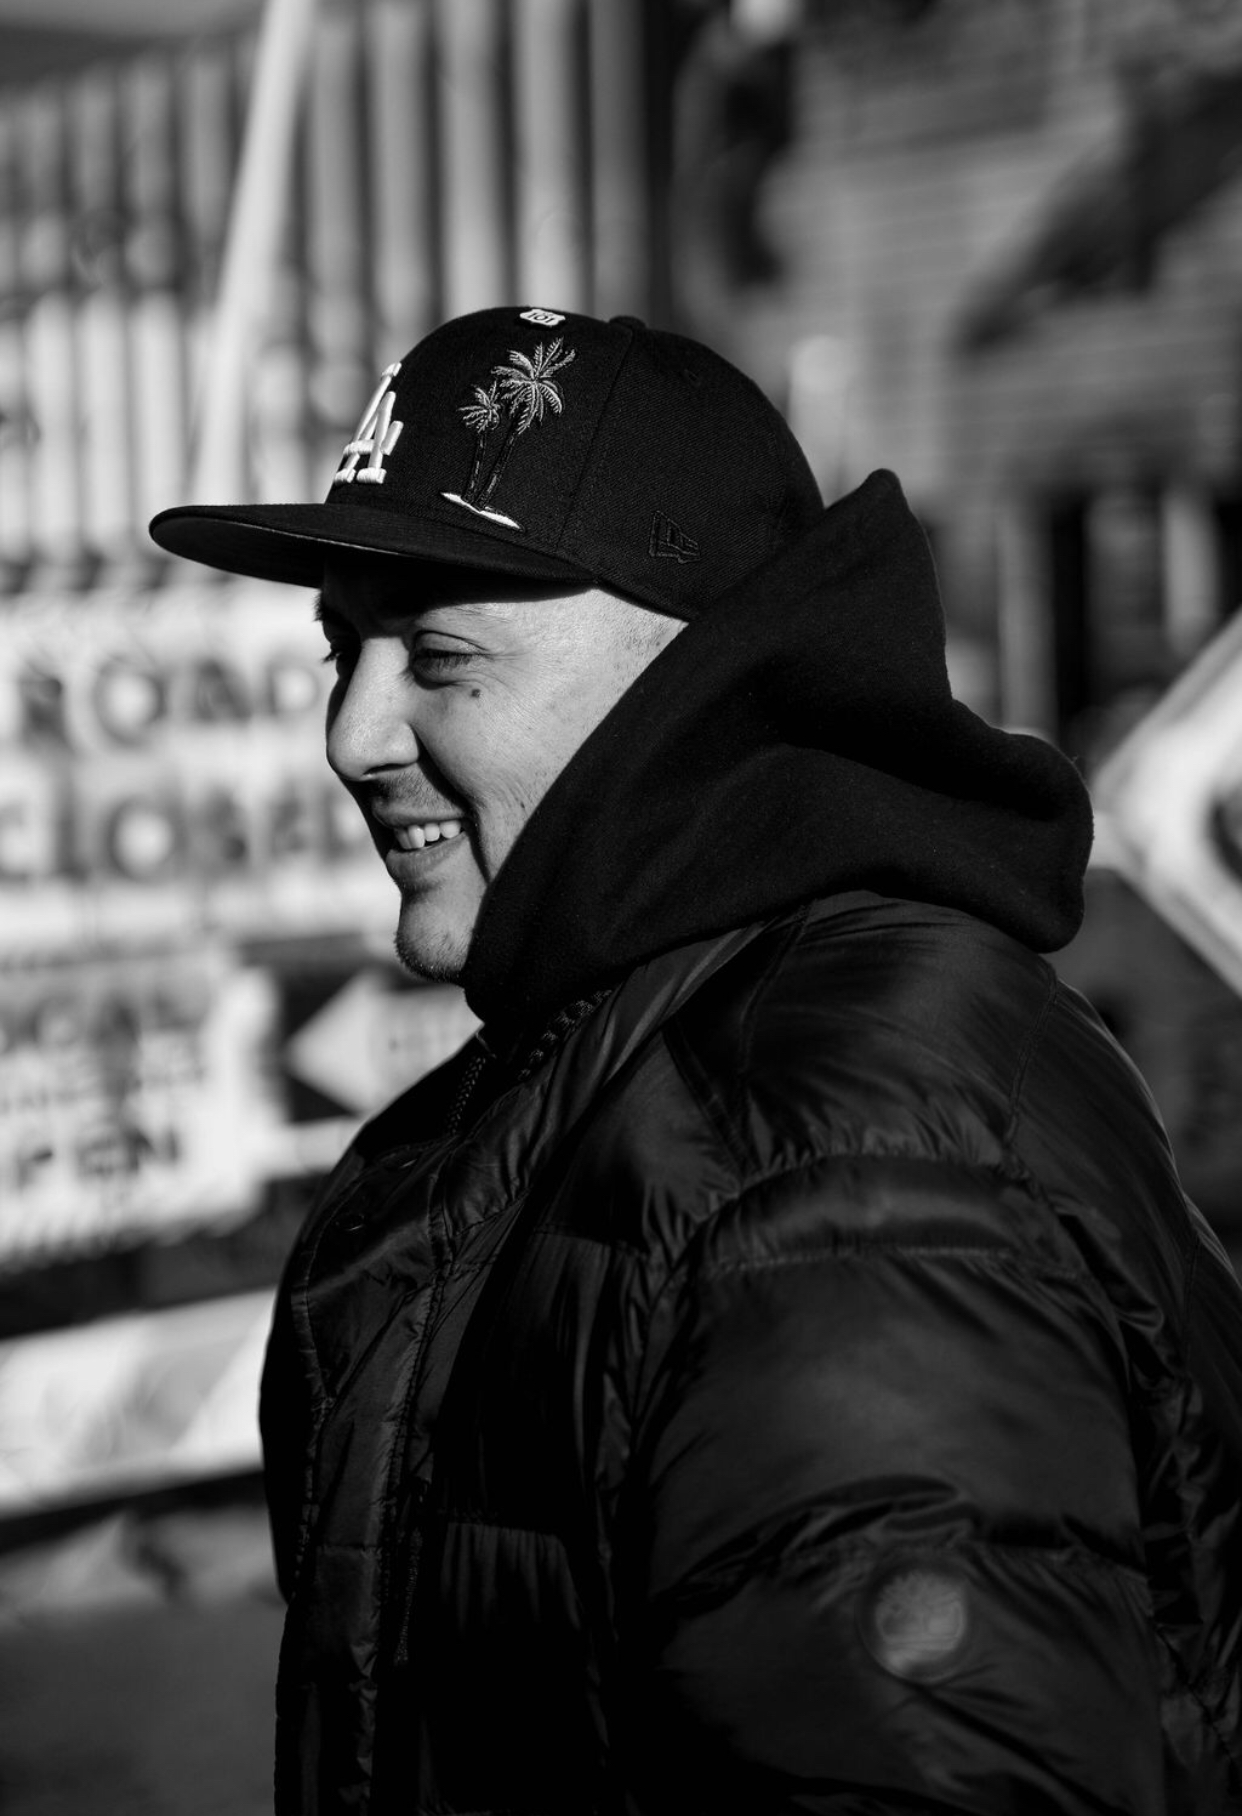 Black and white photograph of the presenting artist. He is centered in the frame, alone, smiling. The image is shot profile and he is wearing a baseball hat and jacket.